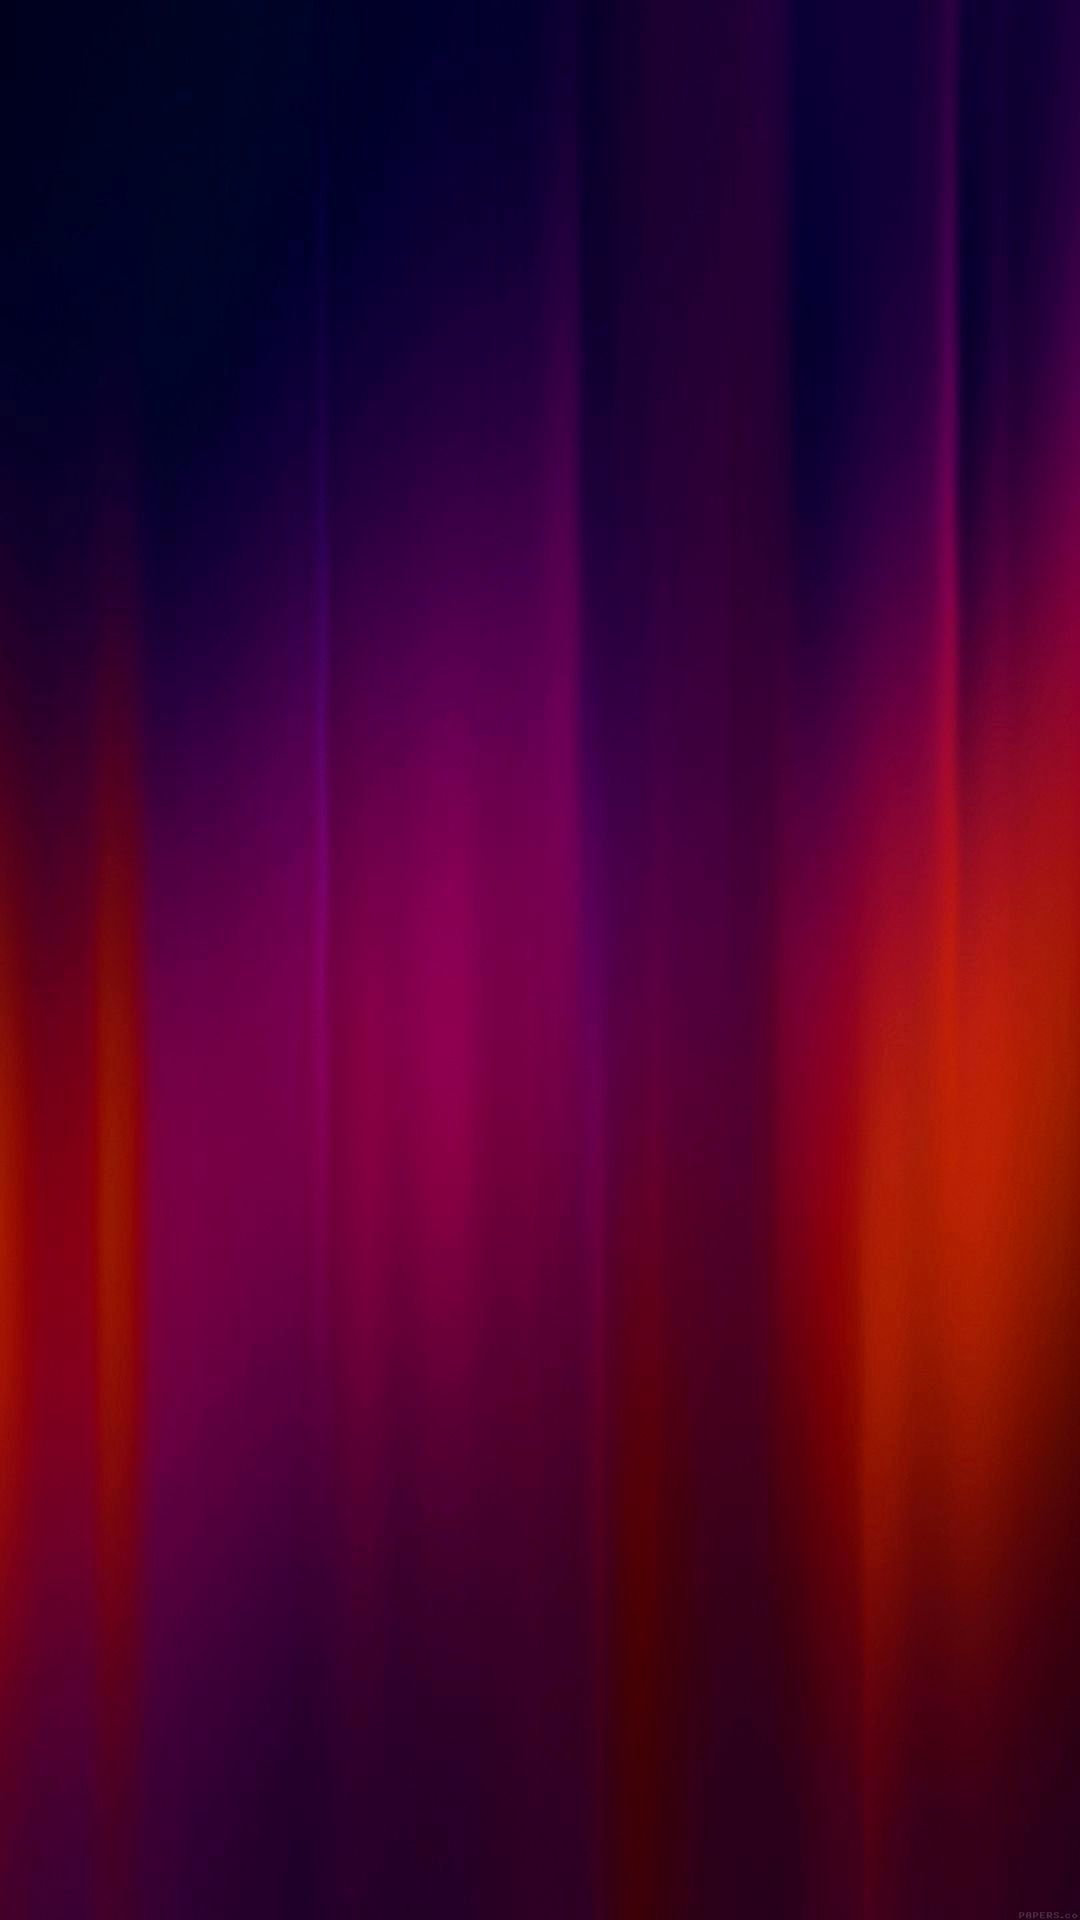 Shapes and lines in red and purple Wallpaper 8k Ultra HD ID7845